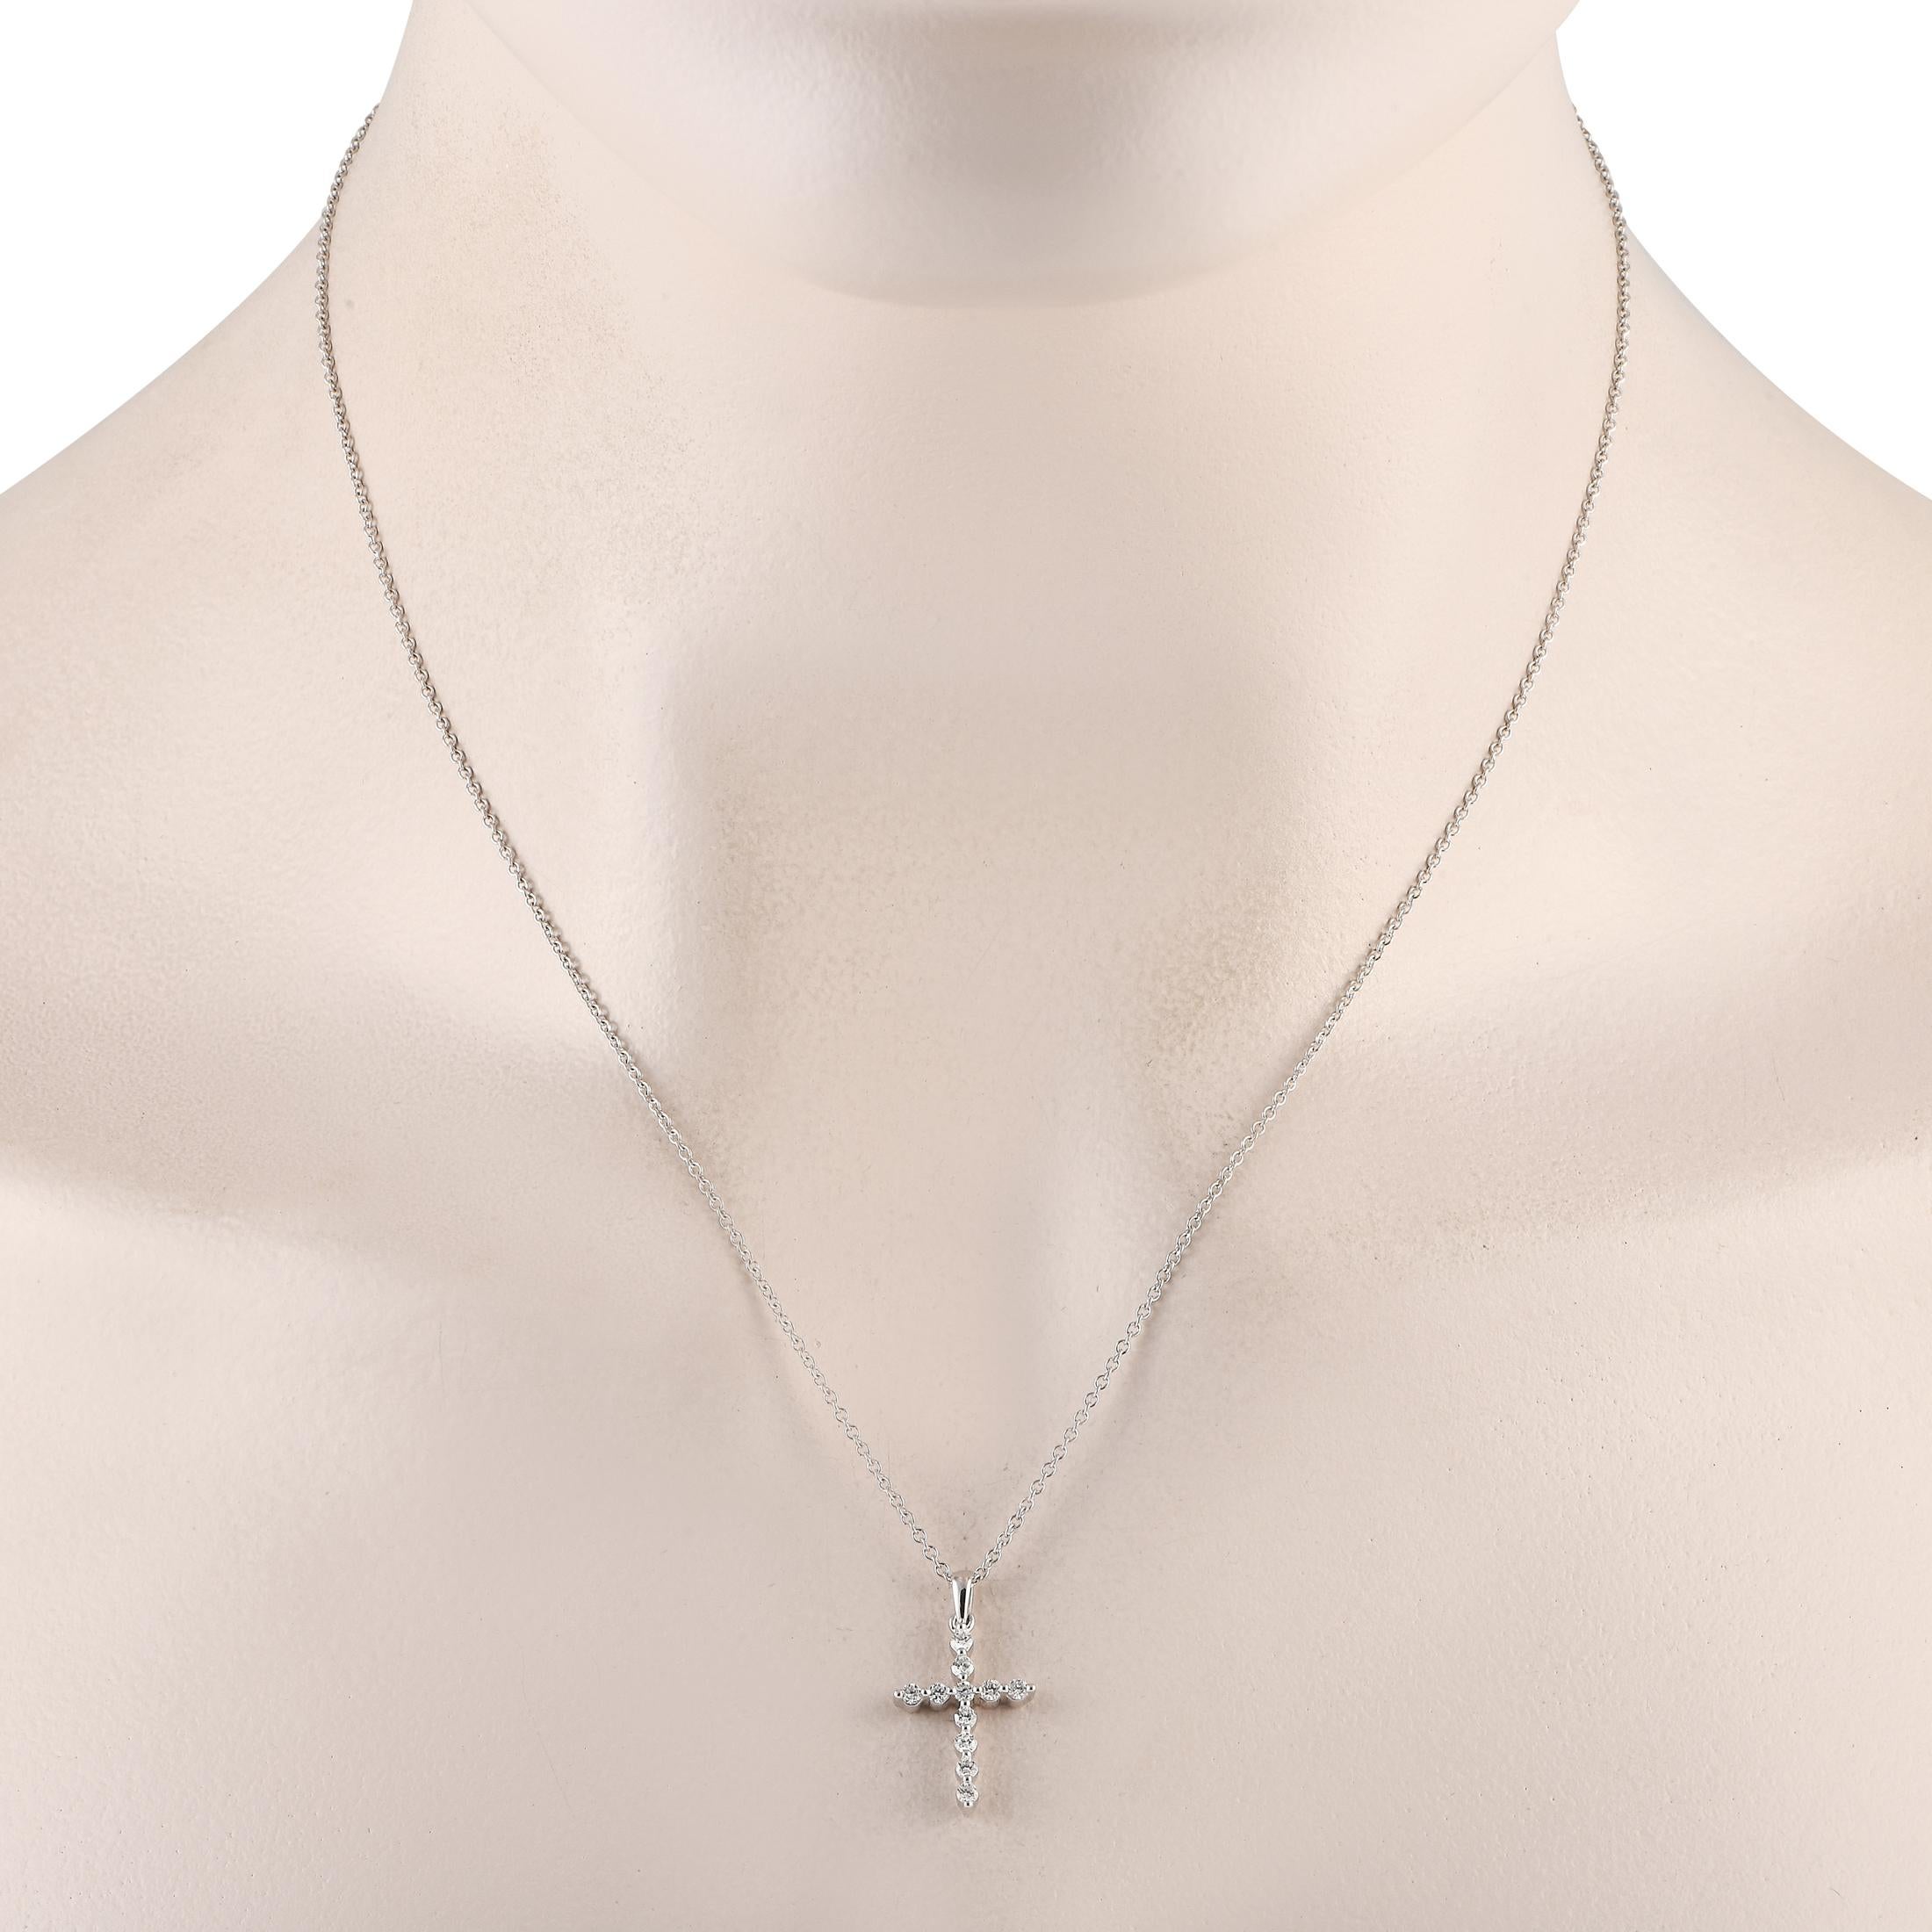 Let your belief shine through this radiant necklace. It features a 0.75 by 0.50 cross pendant detailed with 11 round brilliant diamonds. The necklace comes with a delicate, barely-there chain which makes this piece perfect for layering.This brand